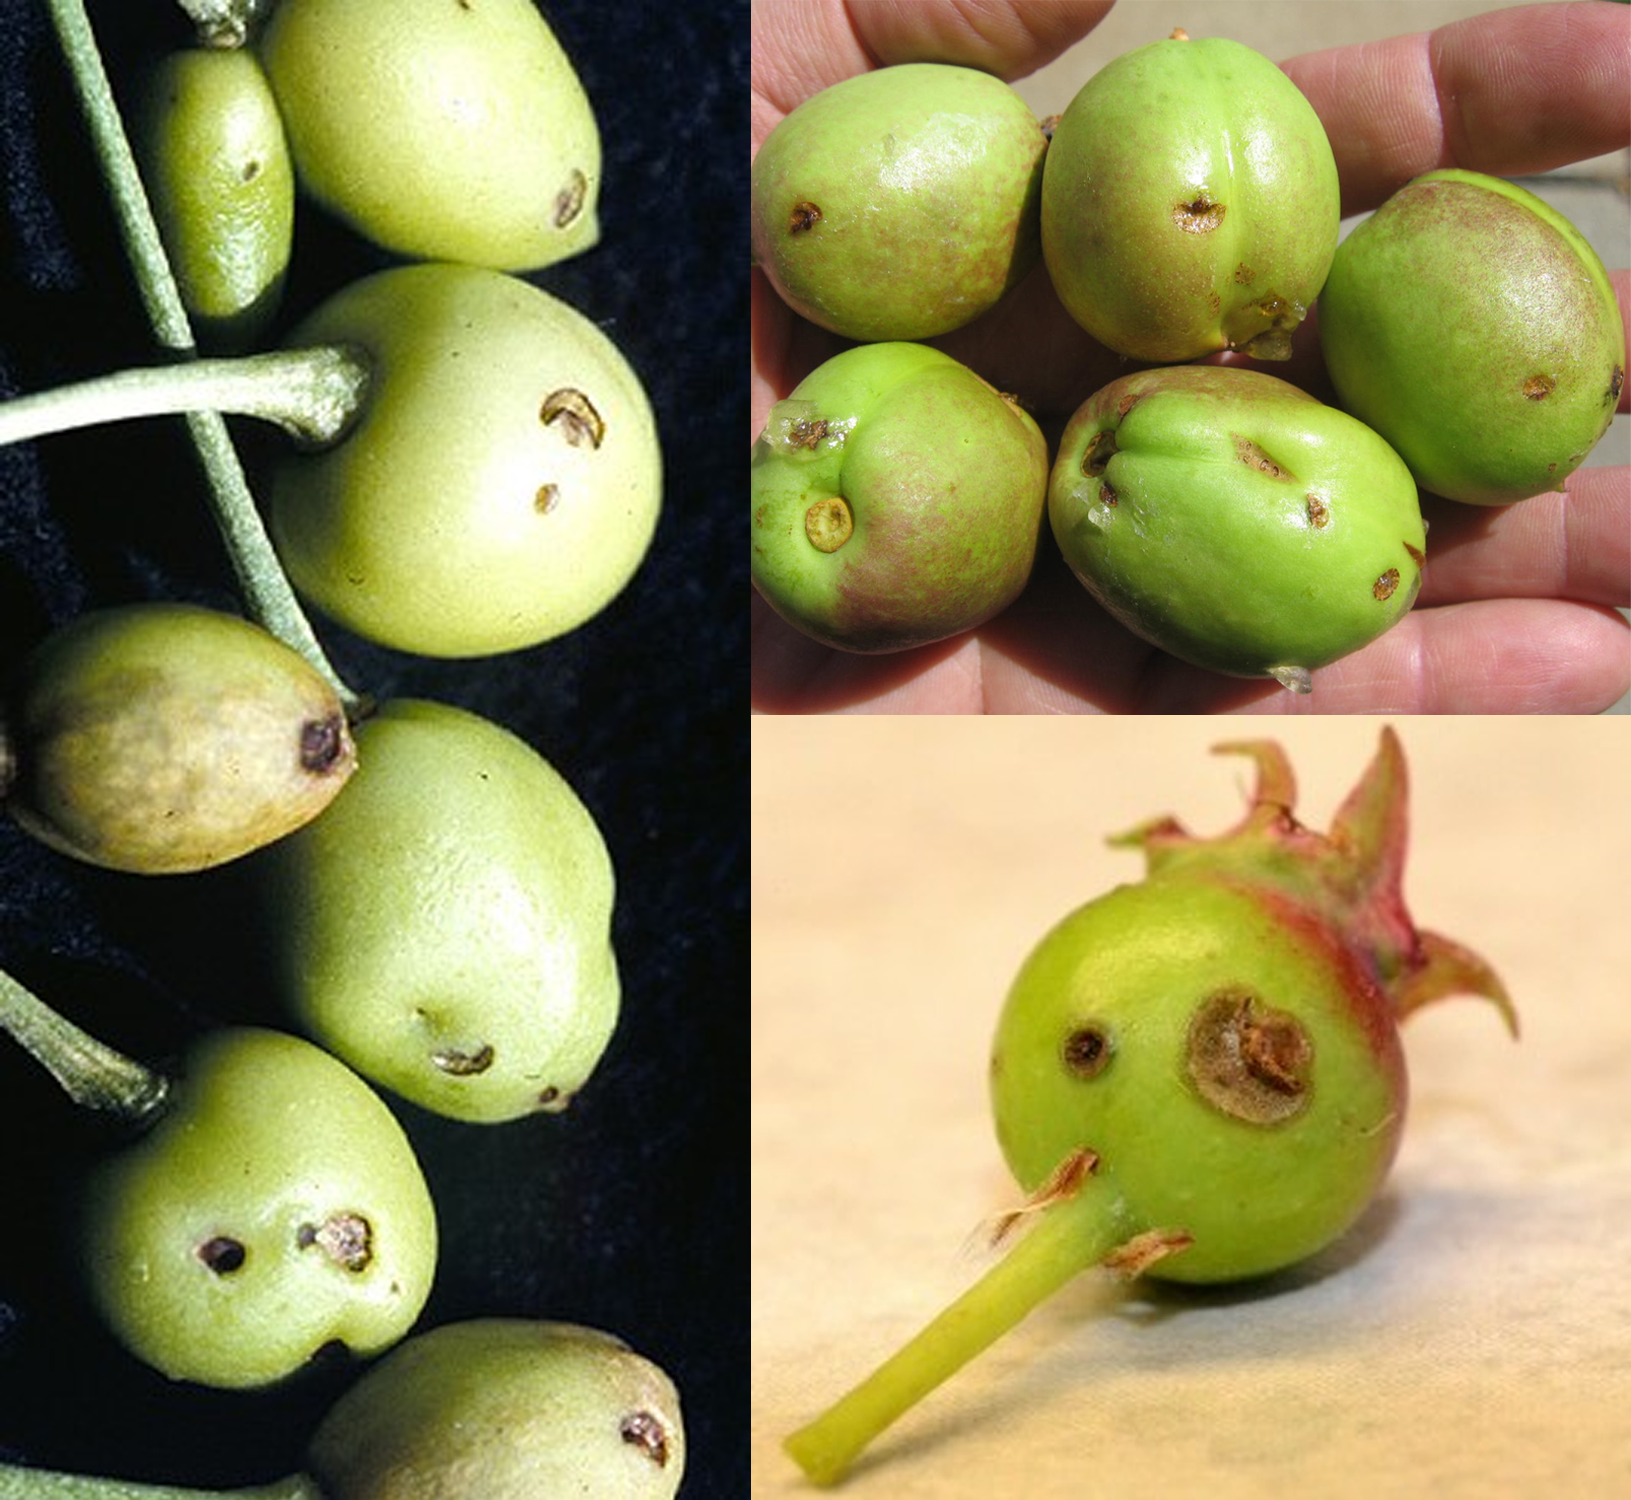 Fig. 7. Plum curculio feeding and egg-laying damage on cherries (left; Utah State University Extension), nectarines (upper right; Michigan Plum Growers), and saskatoon/western serviceberry (lower right; Michigan State University).